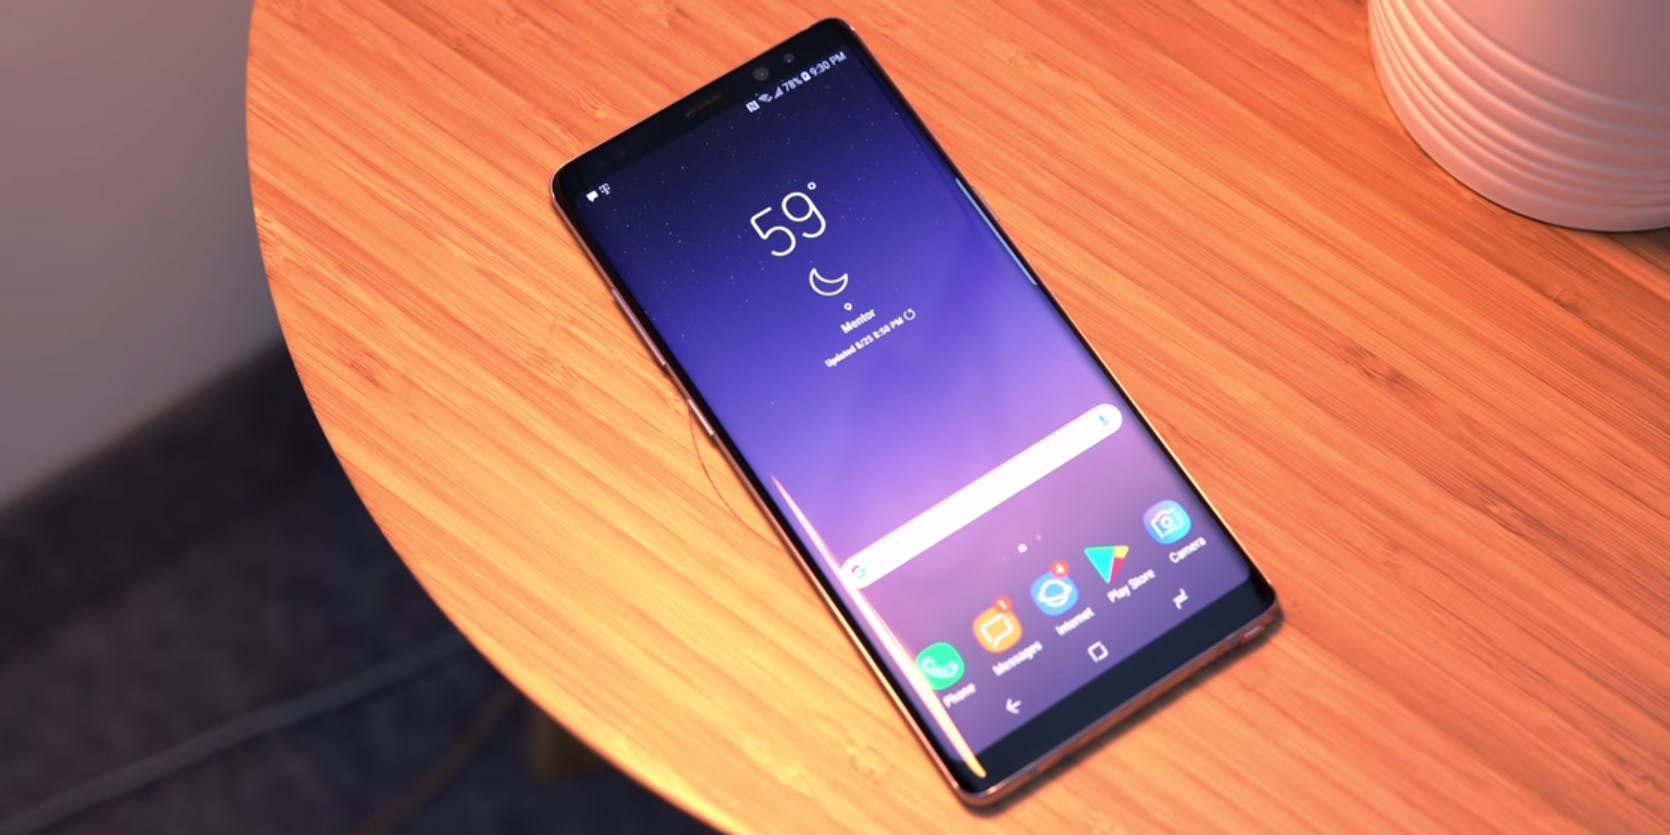 Samsung Galaxy Note 8 review - A noteworthy Samsung Galaxy Note | TechNave